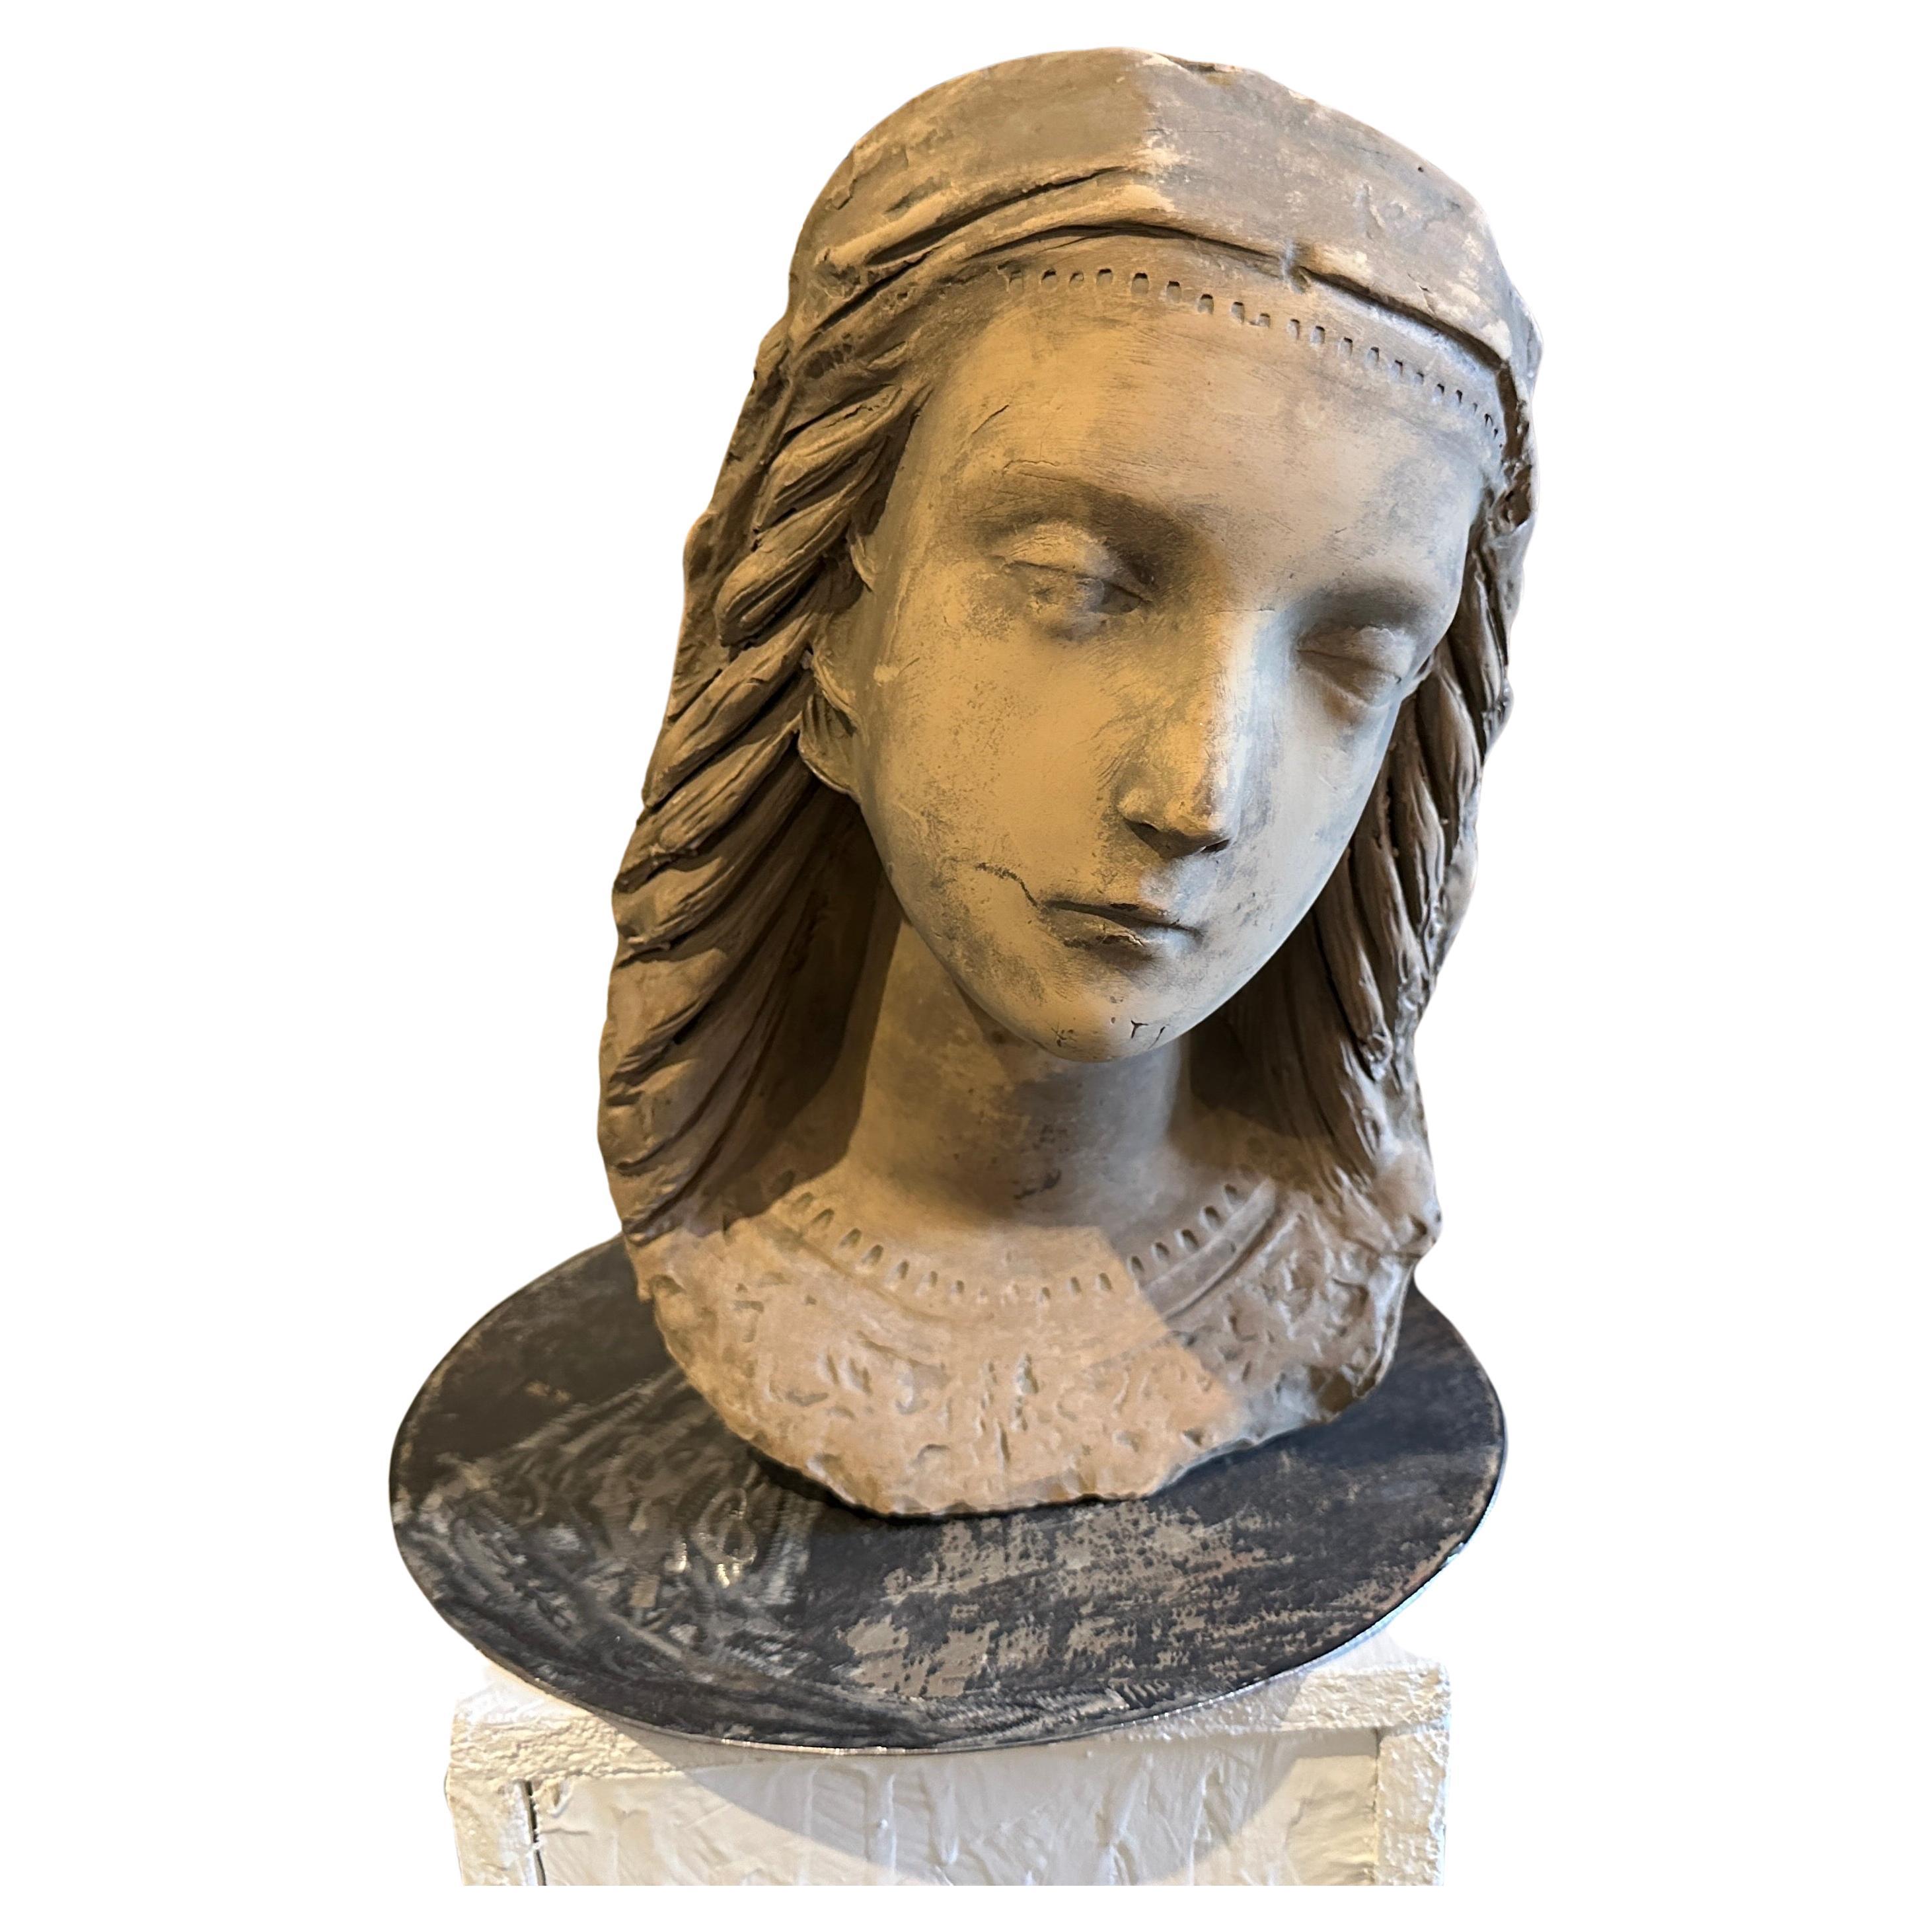 This Terracotta Head of a Young Woman on a new iron base is a striking piece of sculptural art, blending the organic forms and stylized motifs characteristic of the Art Nouveau movement with the distinctive regional influences of Sicilian